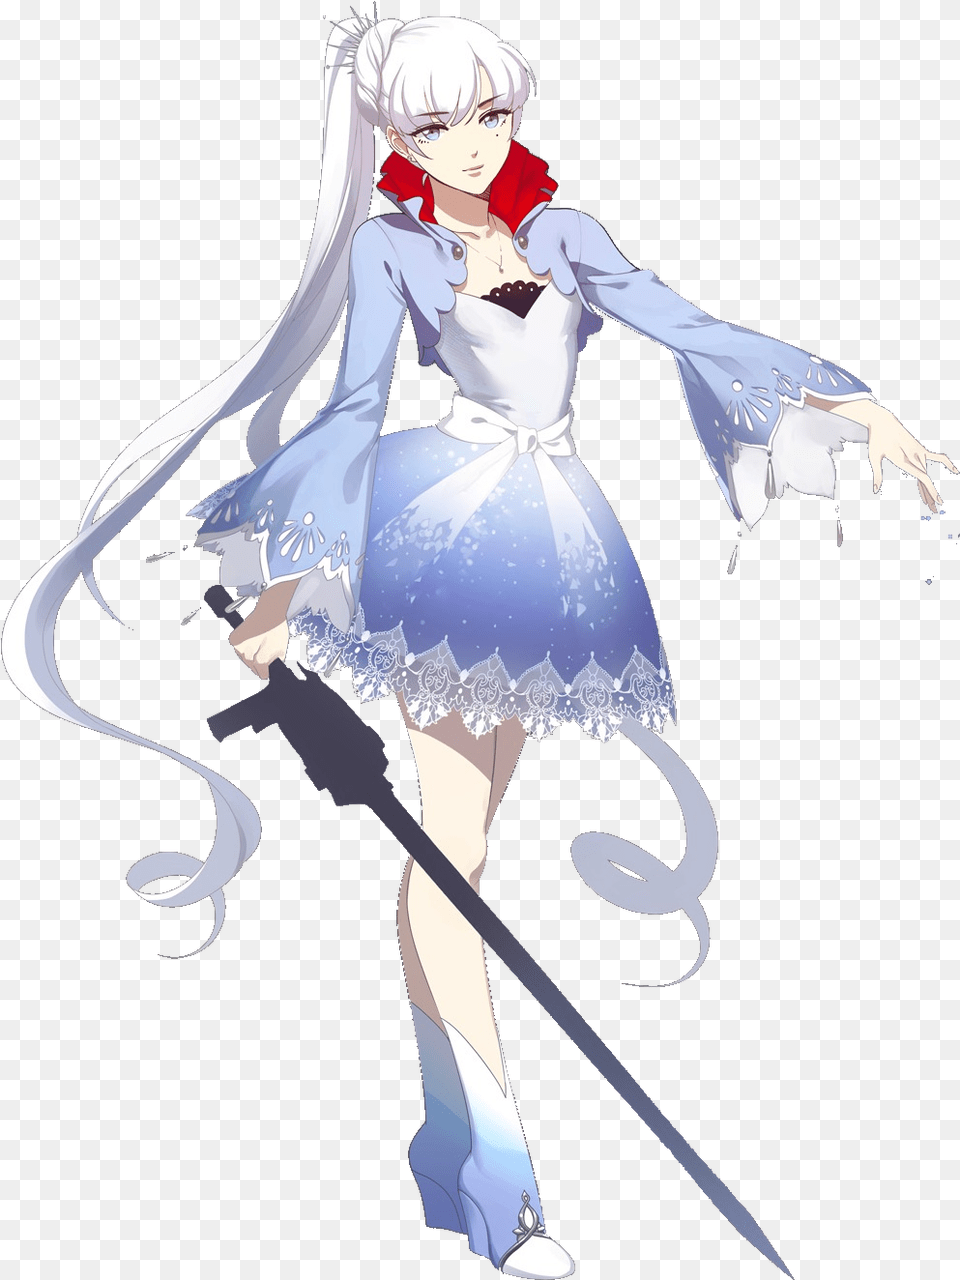 Weiss Schnee Rwby White Trailer Cosplay Costume Rwby White Weiss, Book, Comics, Publication, Adult Png Image